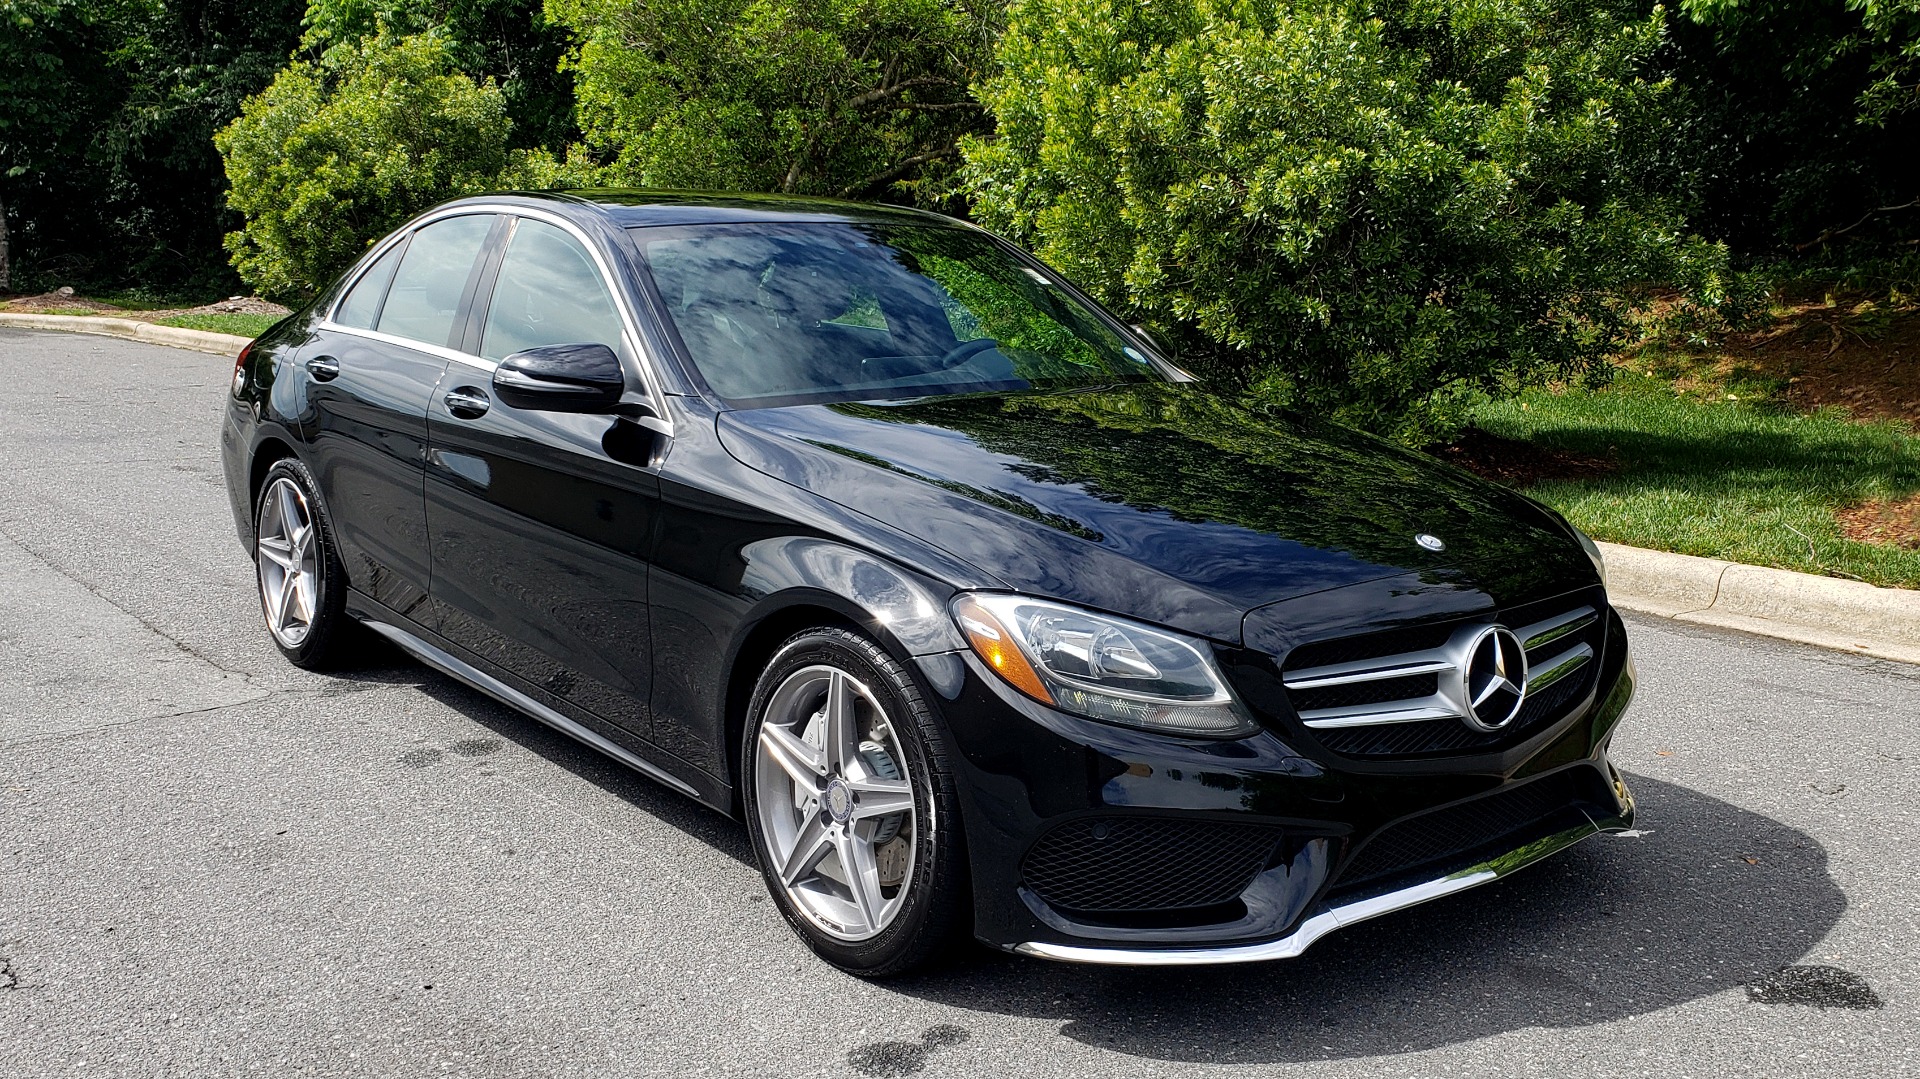 Used 2016 Mercedes-Benz C-CLASS C300 SPORT / PREM PKG / NAV / PANO-ROOF / REARVIEW / KEYLESS-GO for sale Sold at Formula Imports in Charlotte NC 28227 11